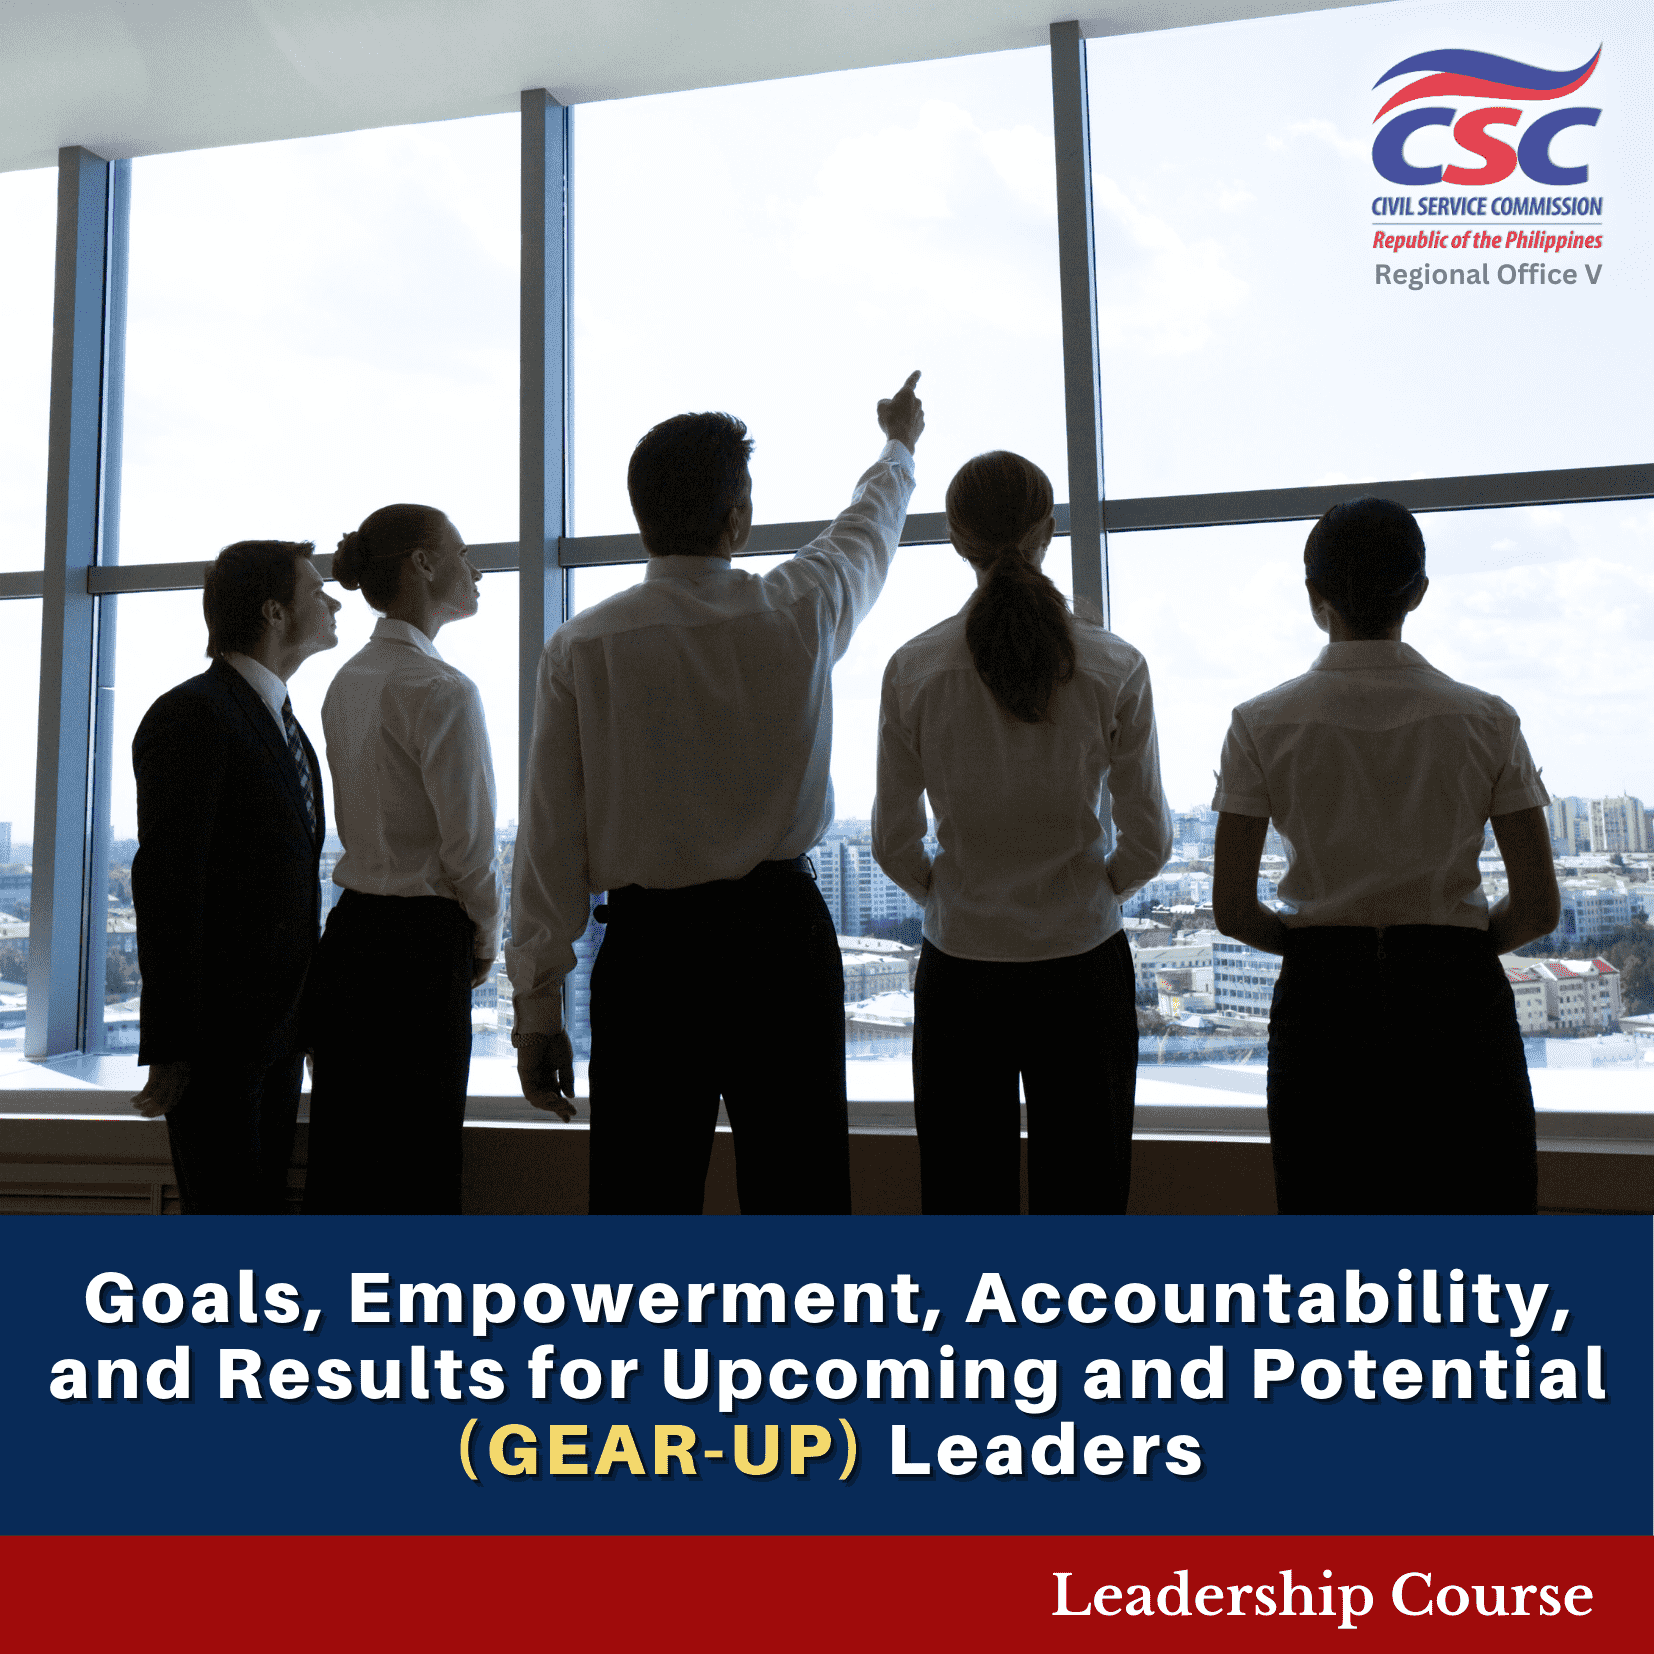 Goals, Empowerment, Accountability, and Results for Upcoming & Potential (GEAR-UP) Leaders